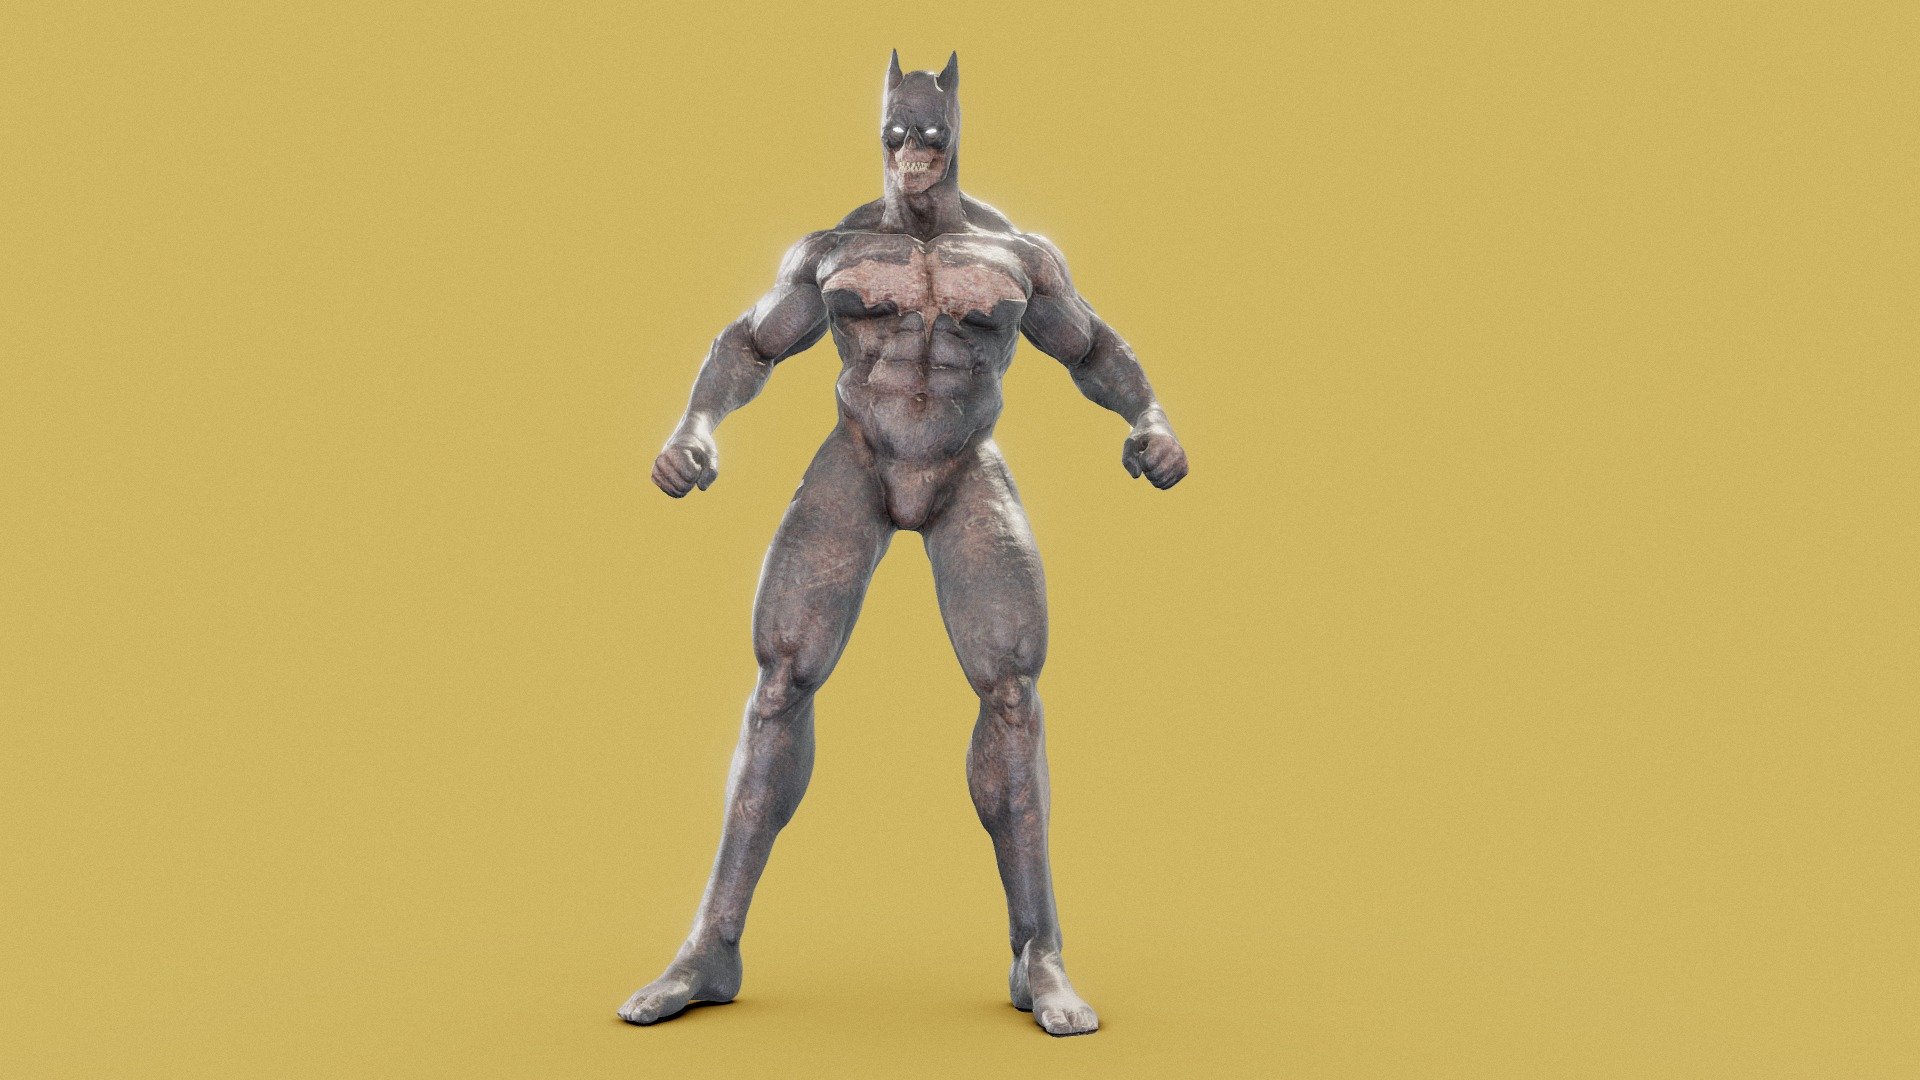 Happy Halloween! 🎃🎃
with the release of venom 2, and with batman around the corner, I wanted to create a cool ass hybrid of venom and batman!
Hope you guys like this!

fully rigged and posed 3d model